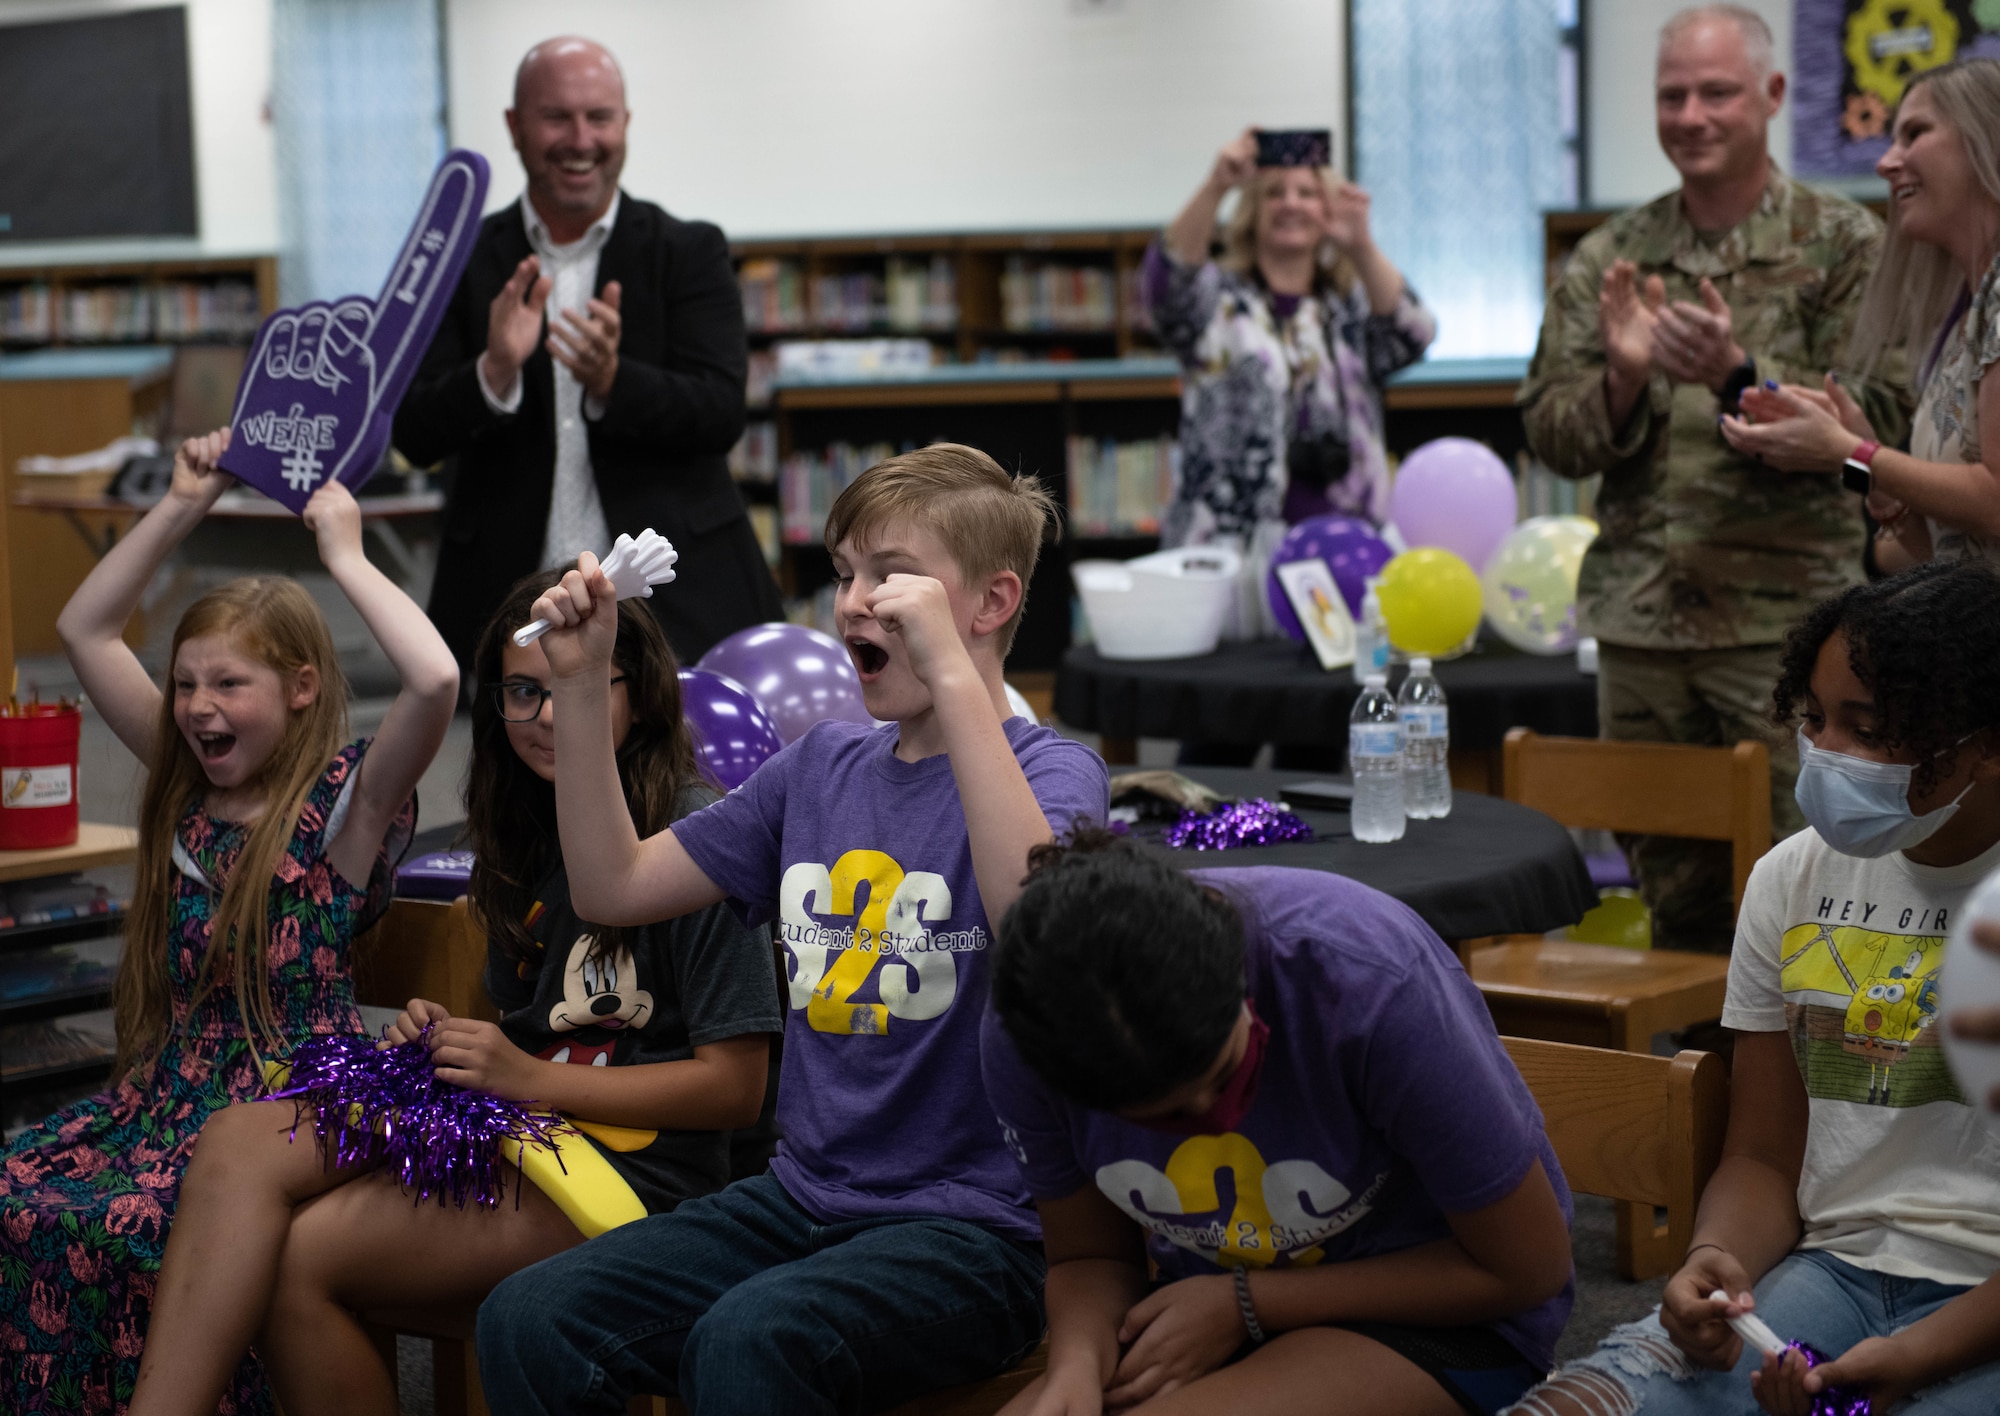 U.S. Air Force Col. Daniel Diehl, 509th Bomb Wing commander, celebrates the win of the Elite Team of the Year award with the Whiteman Elementary students and staff at Whiteman Air Force Base, Missouri, July 21, 2021. The Military Child Education Coalition® announced Whiteman Elementary as the winning school of the organization’s annual Student 2 Student® Team of the Year competition, which recognizes school teams' contribution assisting and integrating military students in their classrooms.